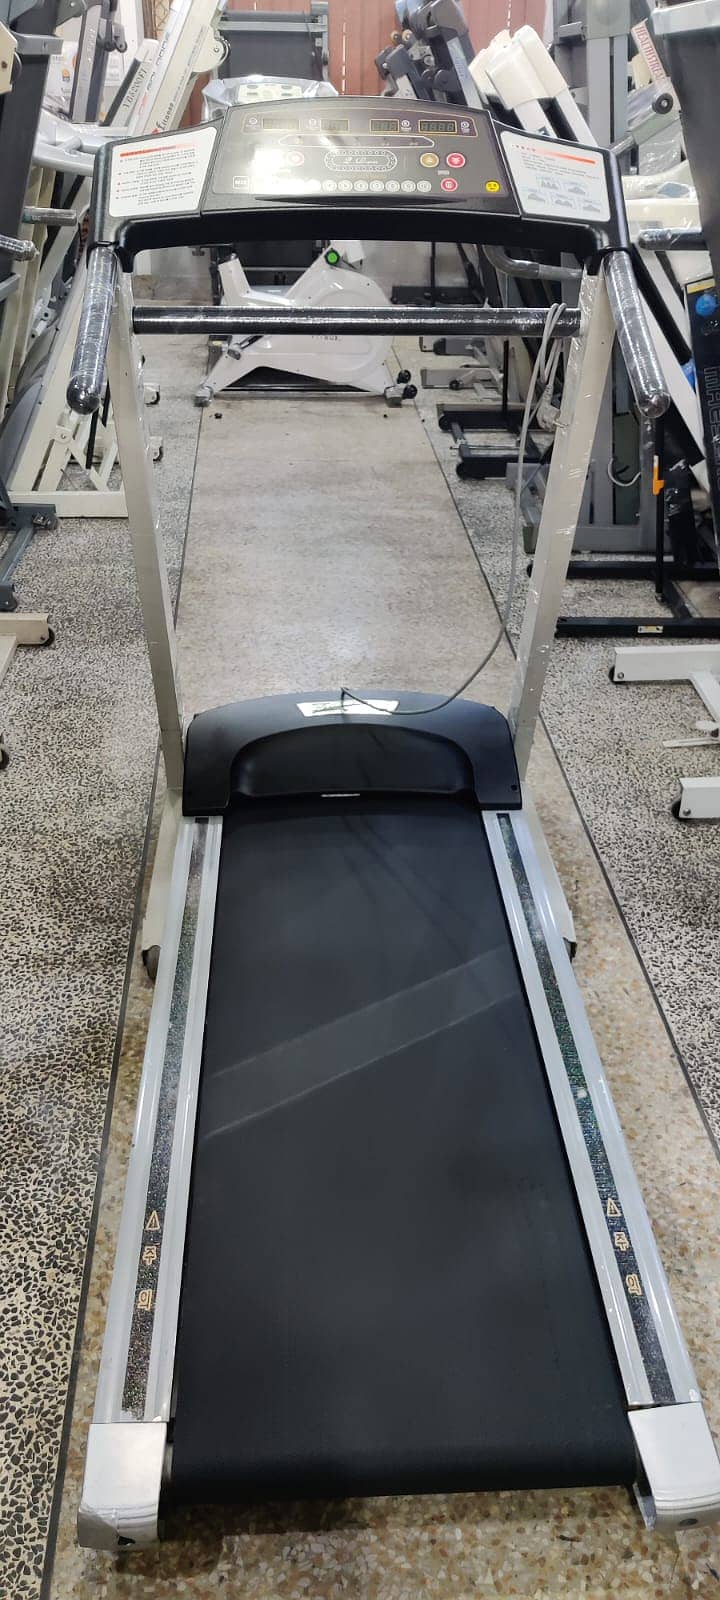 Treadmill Cycle Elliptical Running Machine Cardio Home & Commercial KW 4